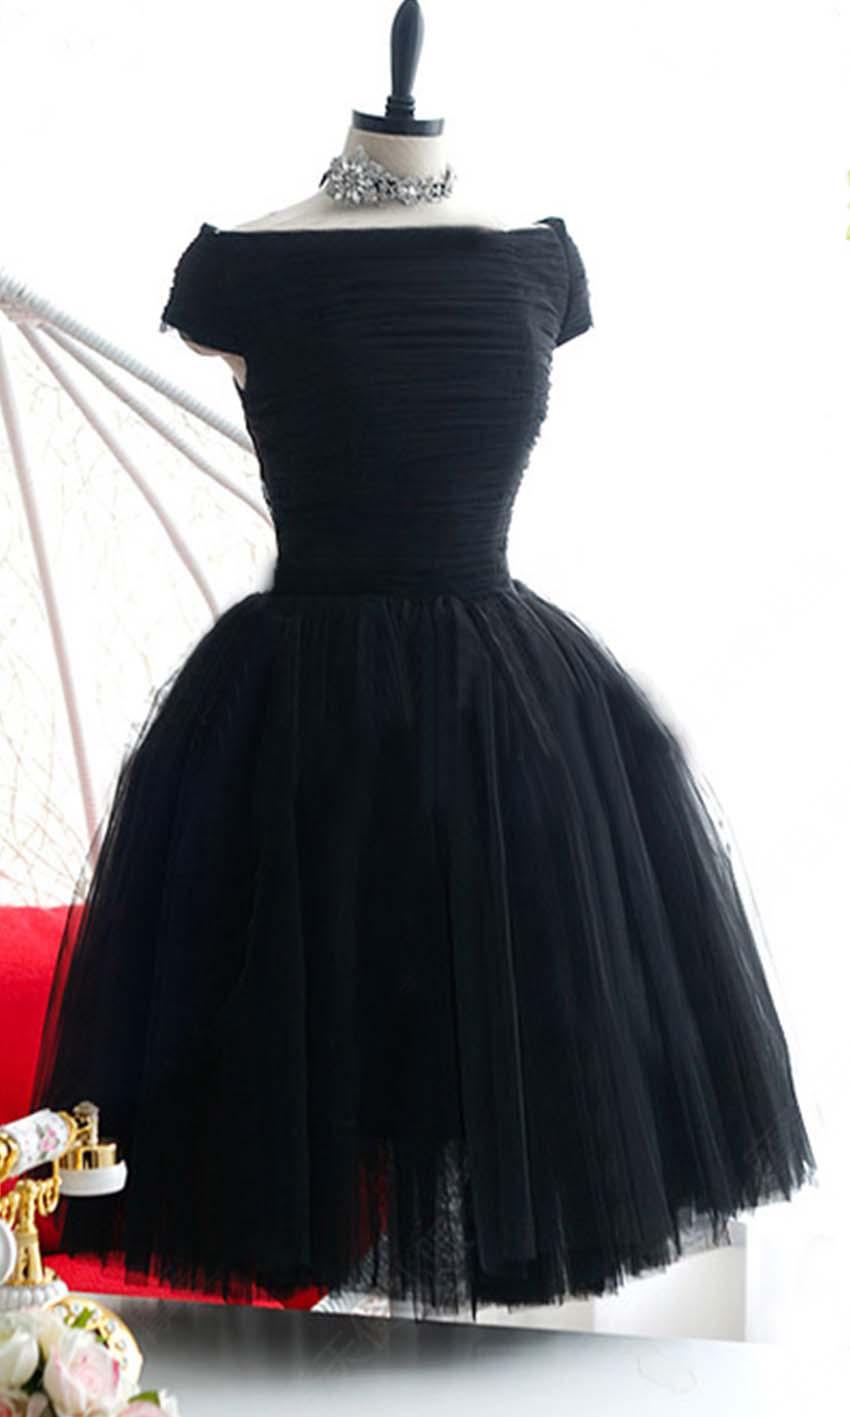 Hochzeit - Vintage Off The Shoulder Little Black Dress KSP352- £88.00 : Cheap Prom Dresses Uk, Bridesmaid Dresses, 2014 Prom & Evening Dresses, Look for cheap elegant prom dresses 2014, cocktail gowns, or dresses for special occasions? kissprom.co.uk offers various 